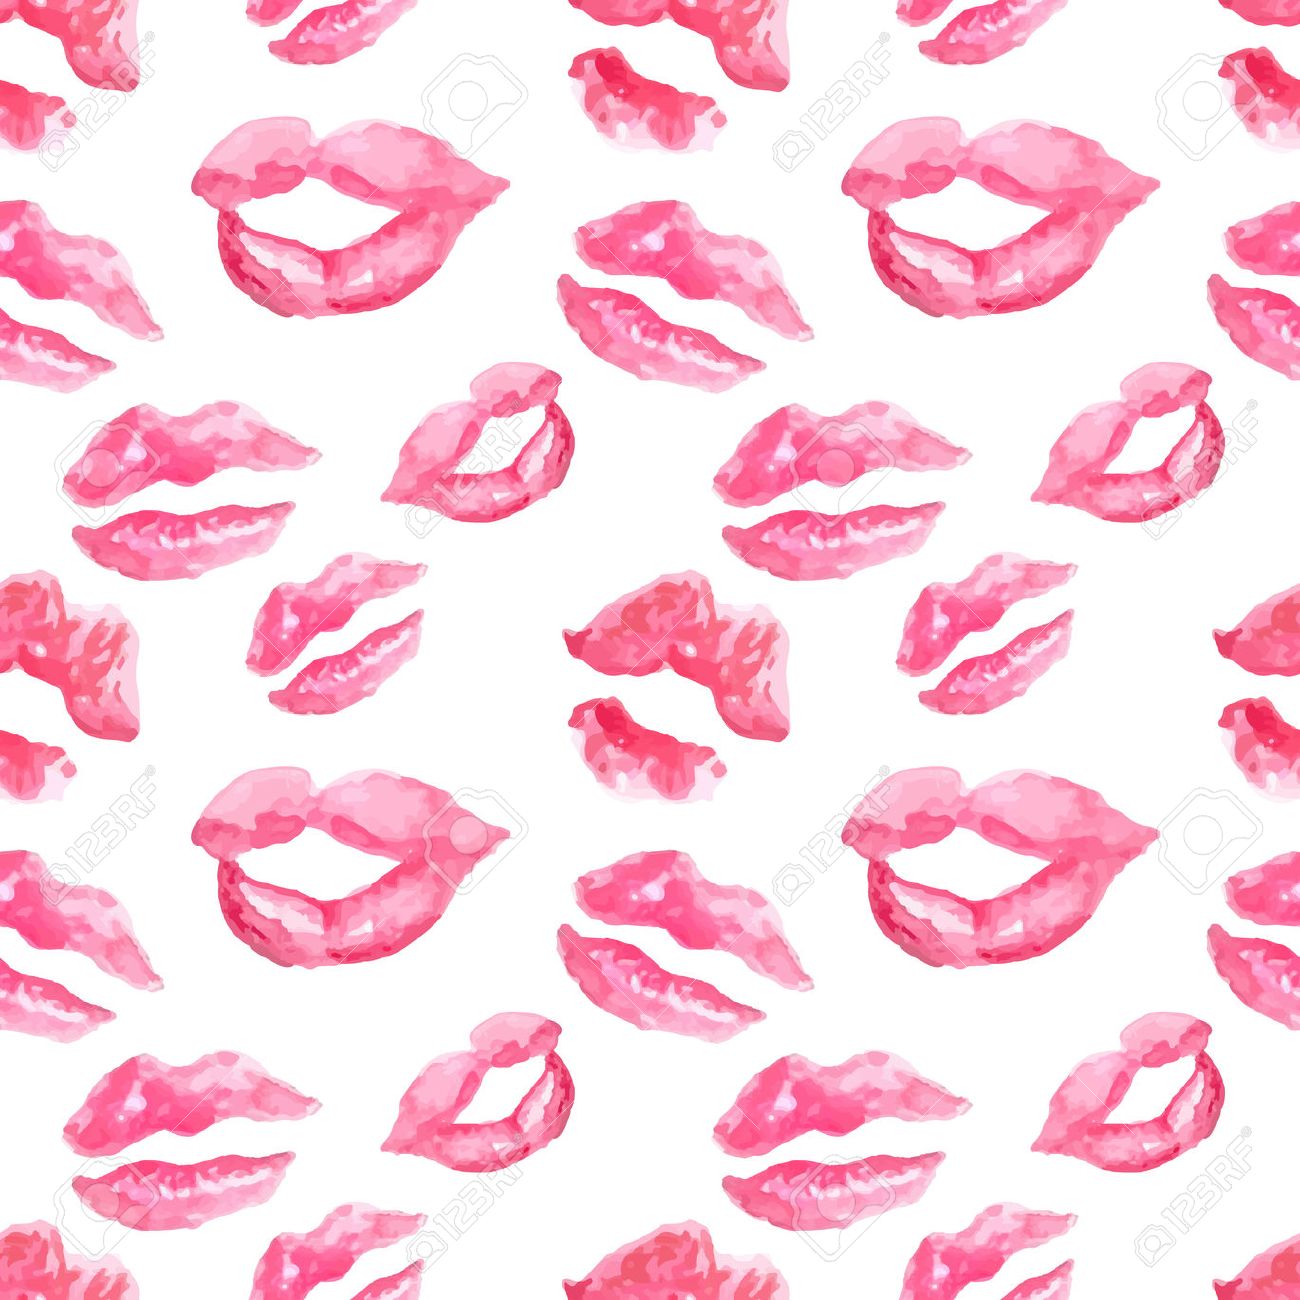 Red Lips Background 35 pictures